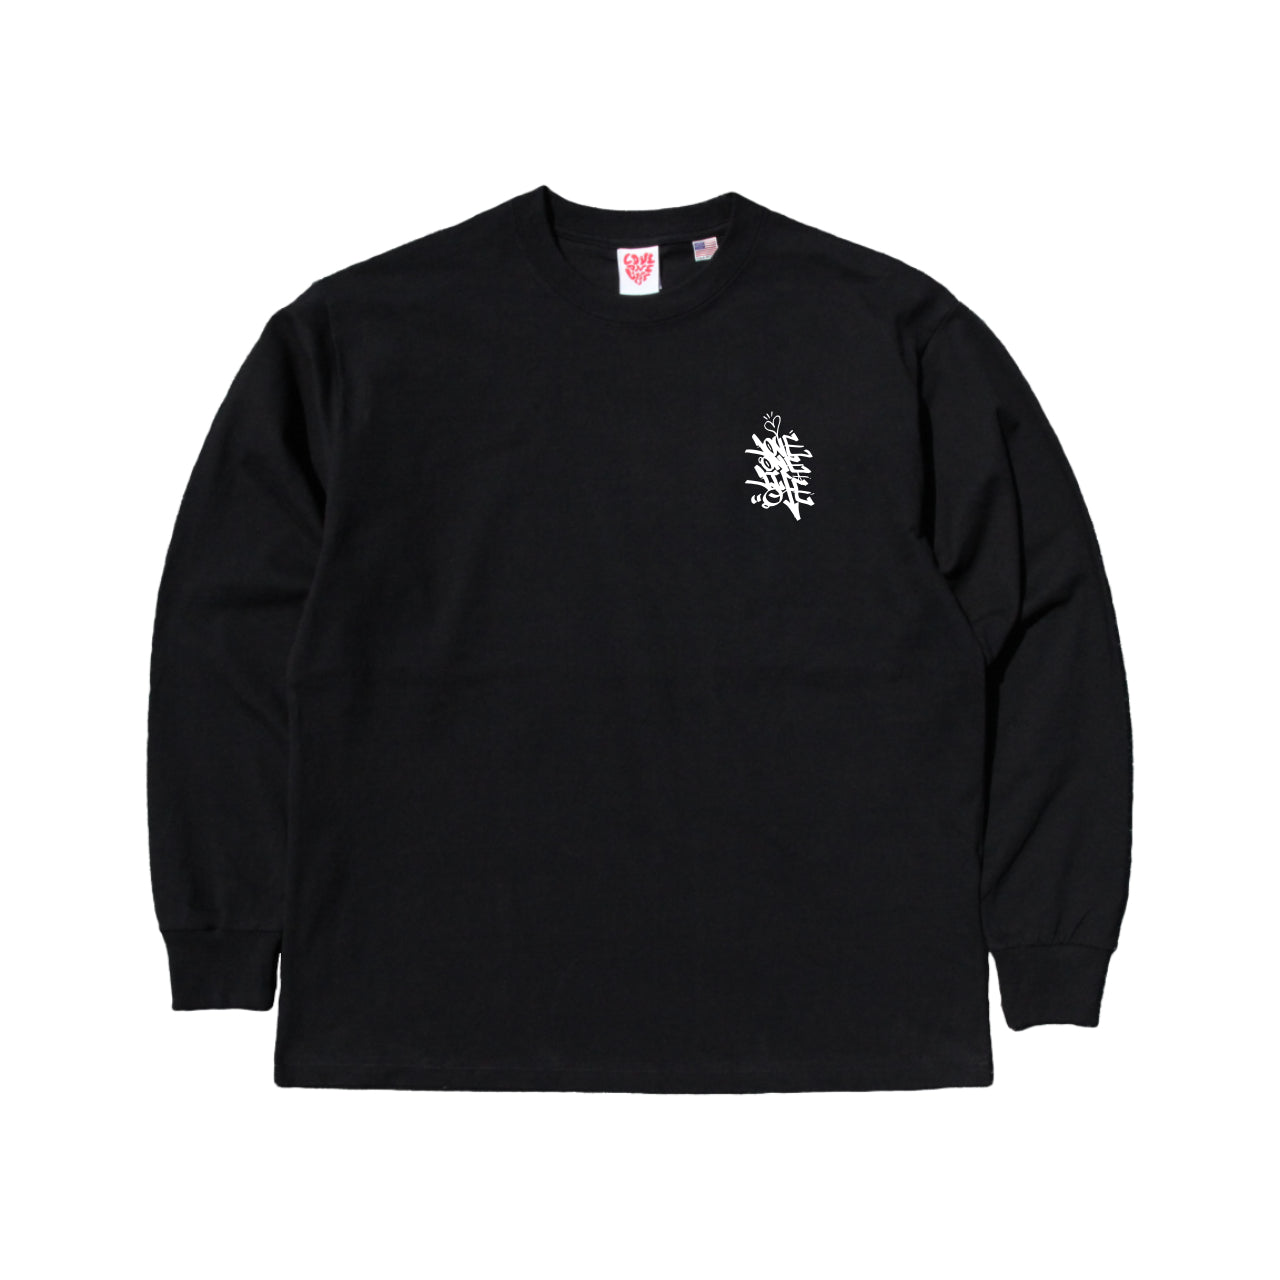 better soul tagging LS tee in black